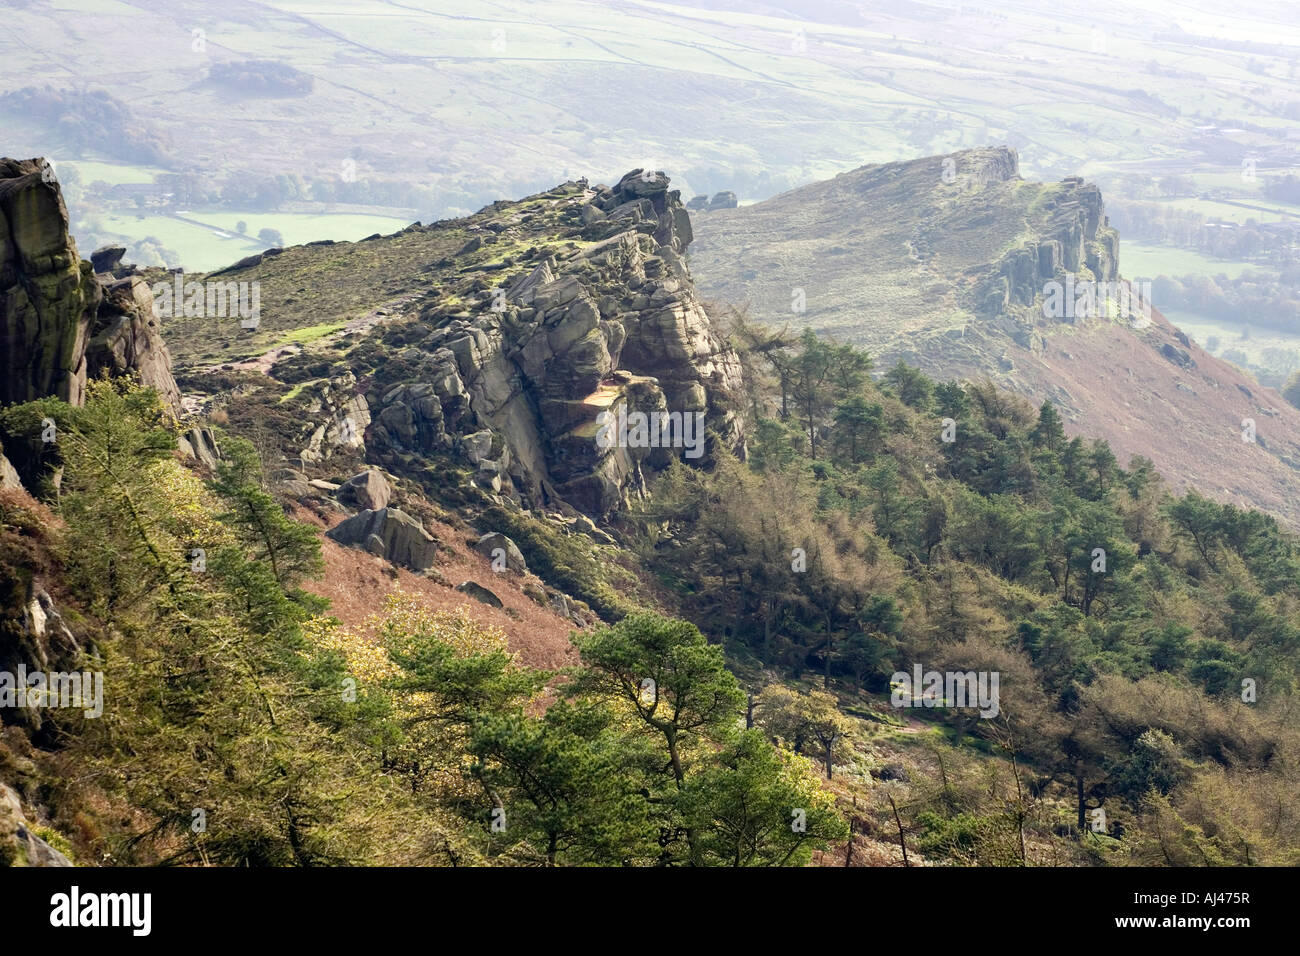 Il Roaches, Staffordshire Moorlands, Inghilterra Foto Stock